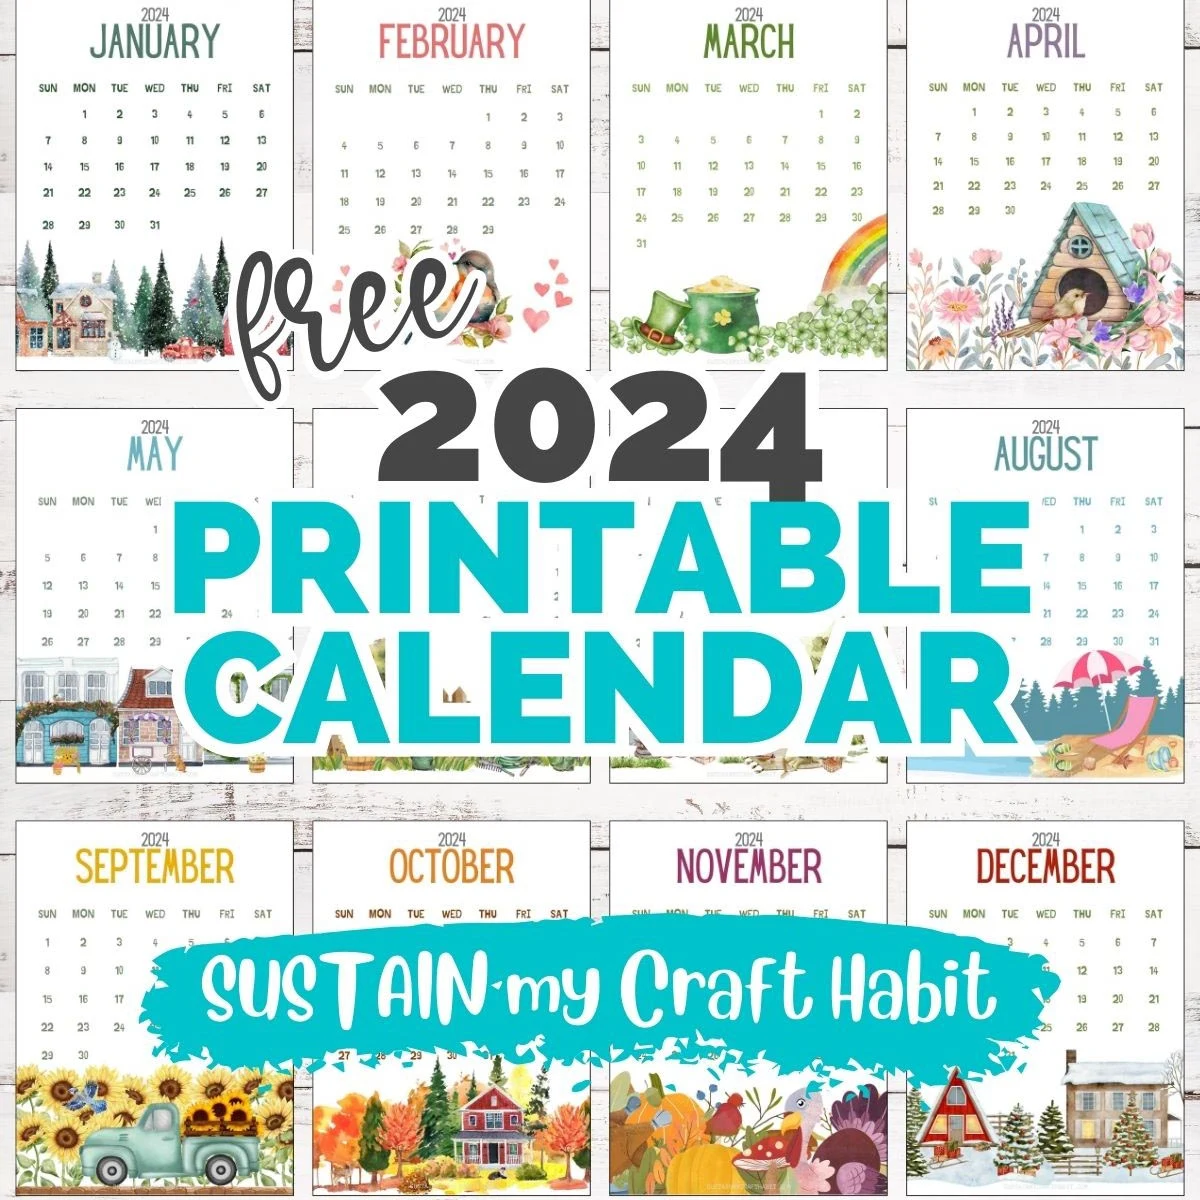 Sample images from 2024 free printable calendar.